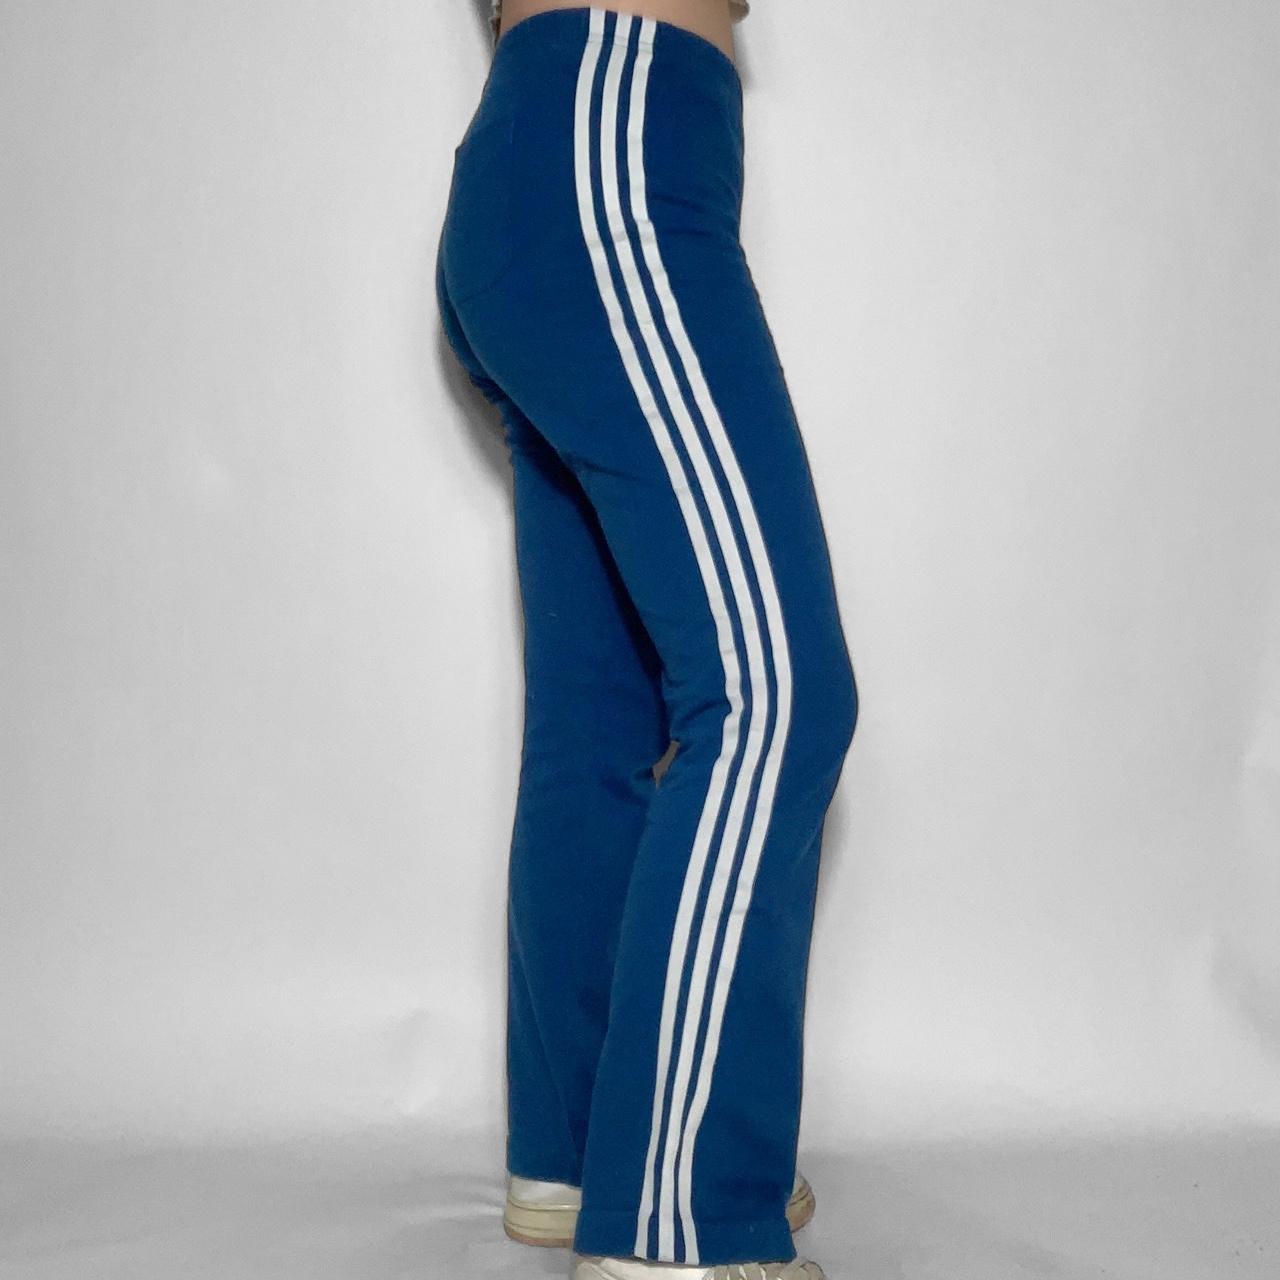 Vintage y2k Adidas low waisted petite blue and white flared track pants